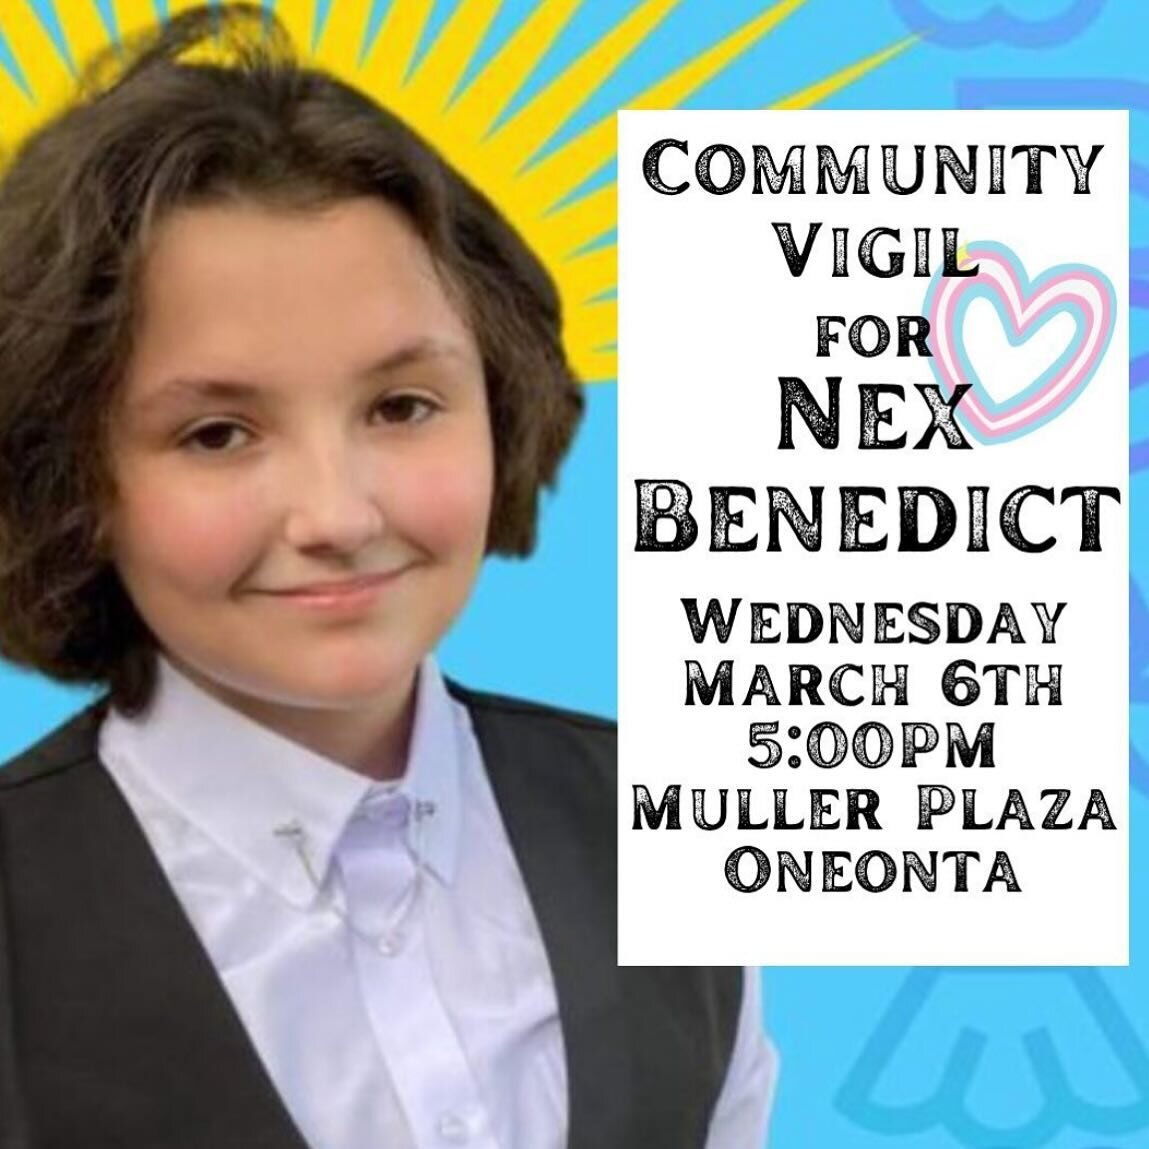 There will be a candlelight vigil for Nex Benedict this Wednesday, 2/6, at 5:00 in Muller Plaza. Bring signs to honor Nex&rsquo;s memory. If you are interested in speaking, please send a message to @otsegopridealliance!